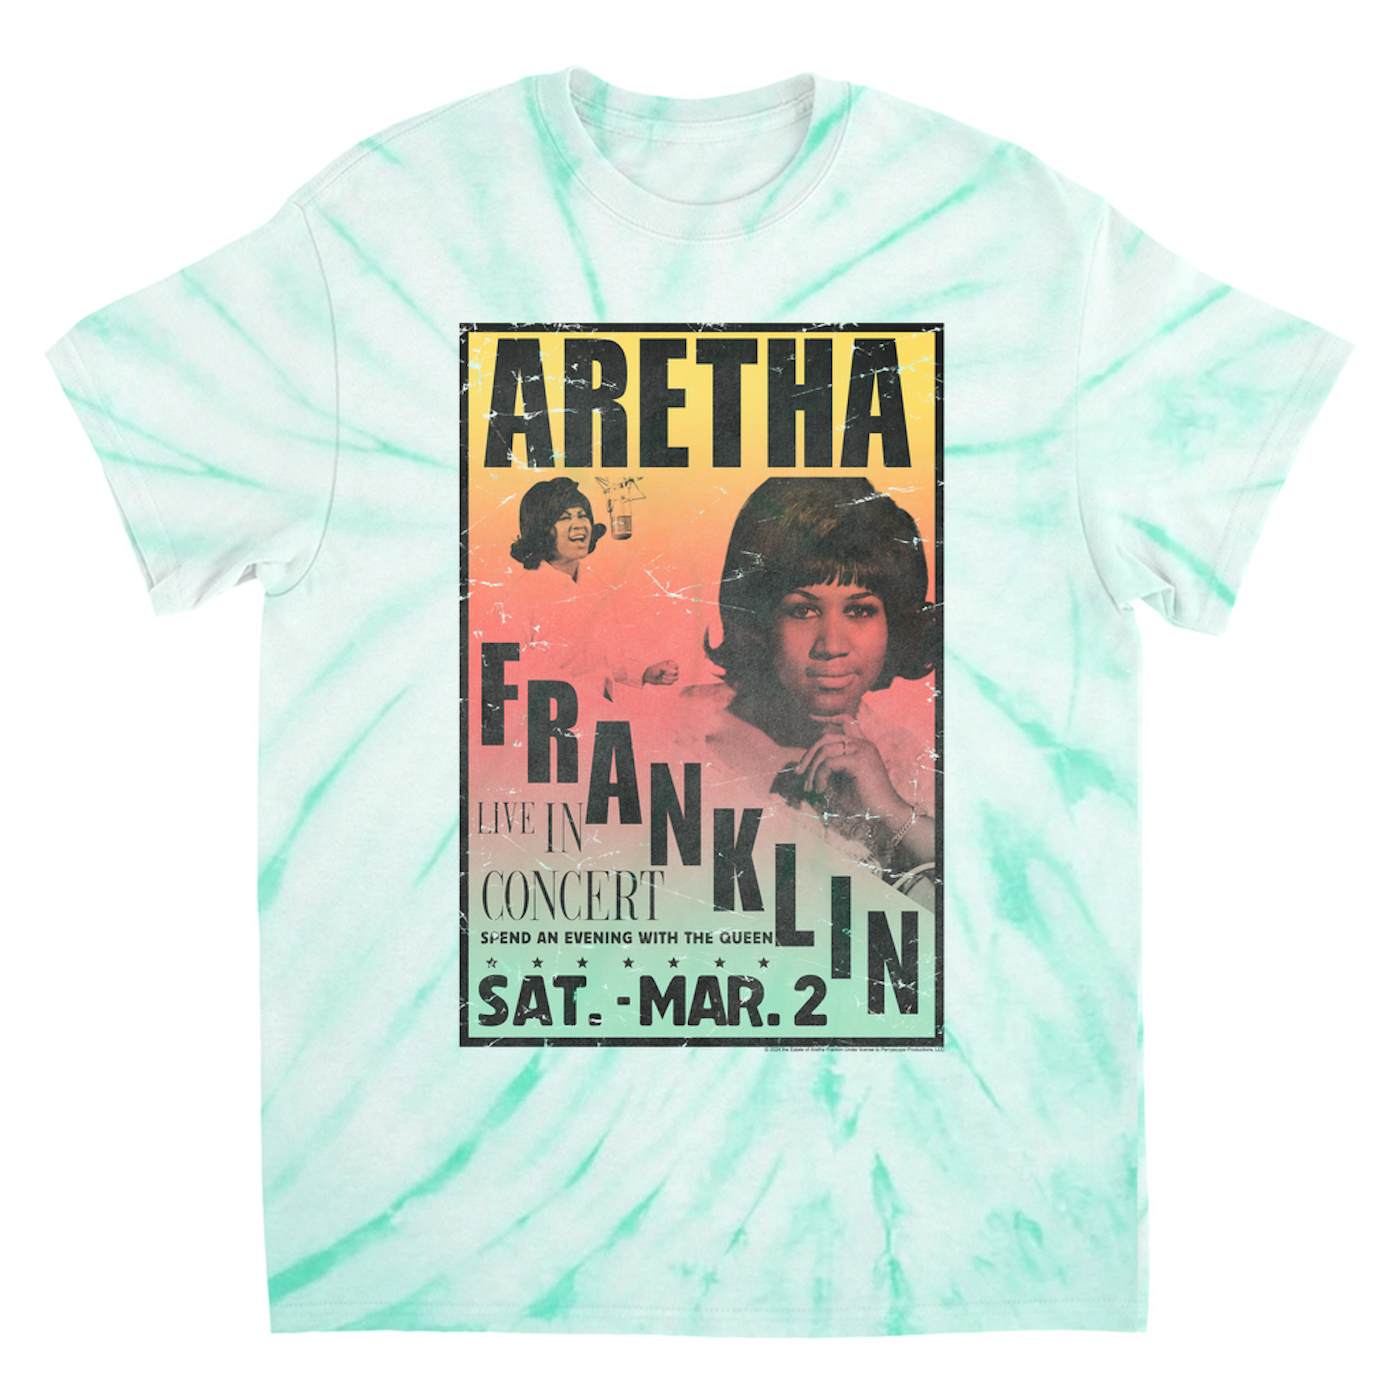 Aretha Franklin T-Shirt | An Evening With The Queen Rainbow Ombre Aretha Franklin Tie Dye Shirt